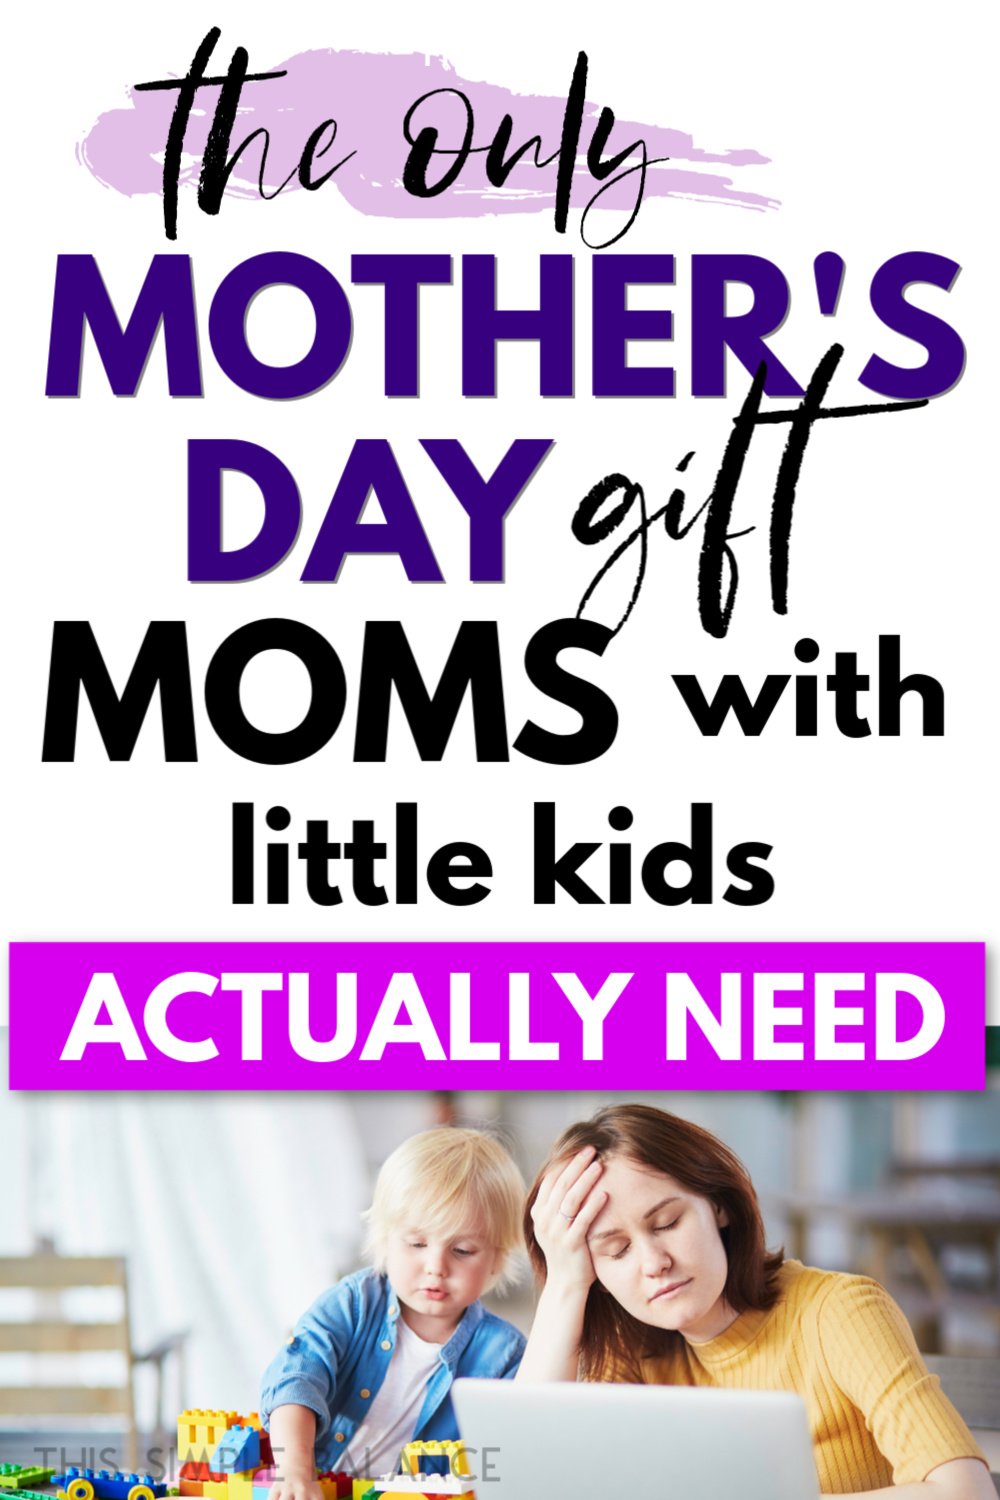 tired mom working while toddler boy plays duplo blocks next to her, with text overlay, "the only mother's day gift moms with little kids actually need"